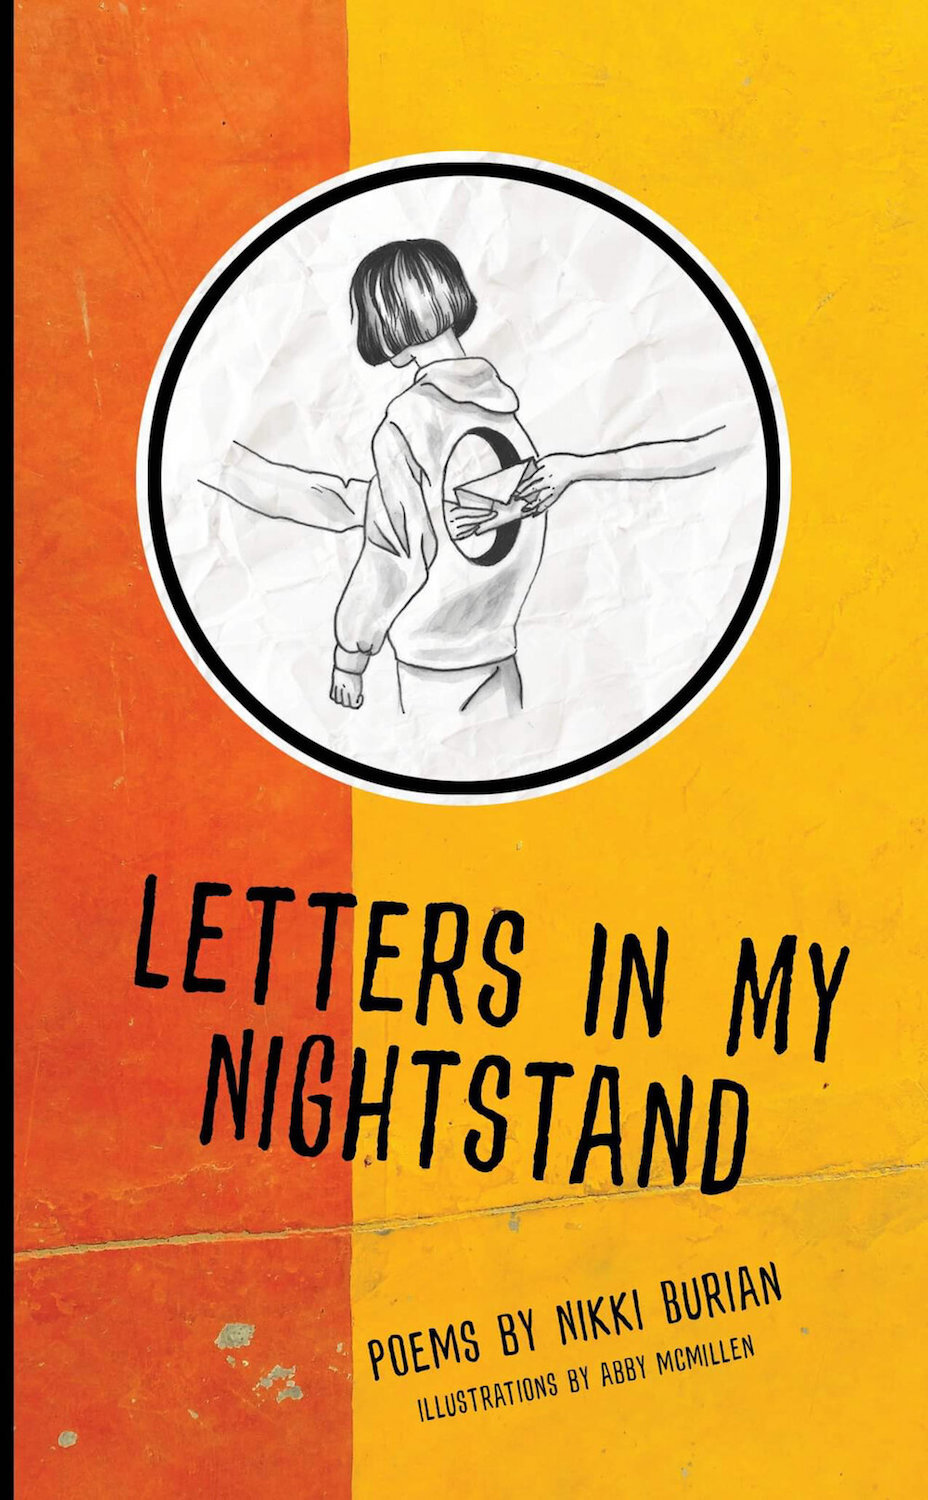 letters-in-my-nightstand-author-published-portland-oregon-marmoset-music.jpg